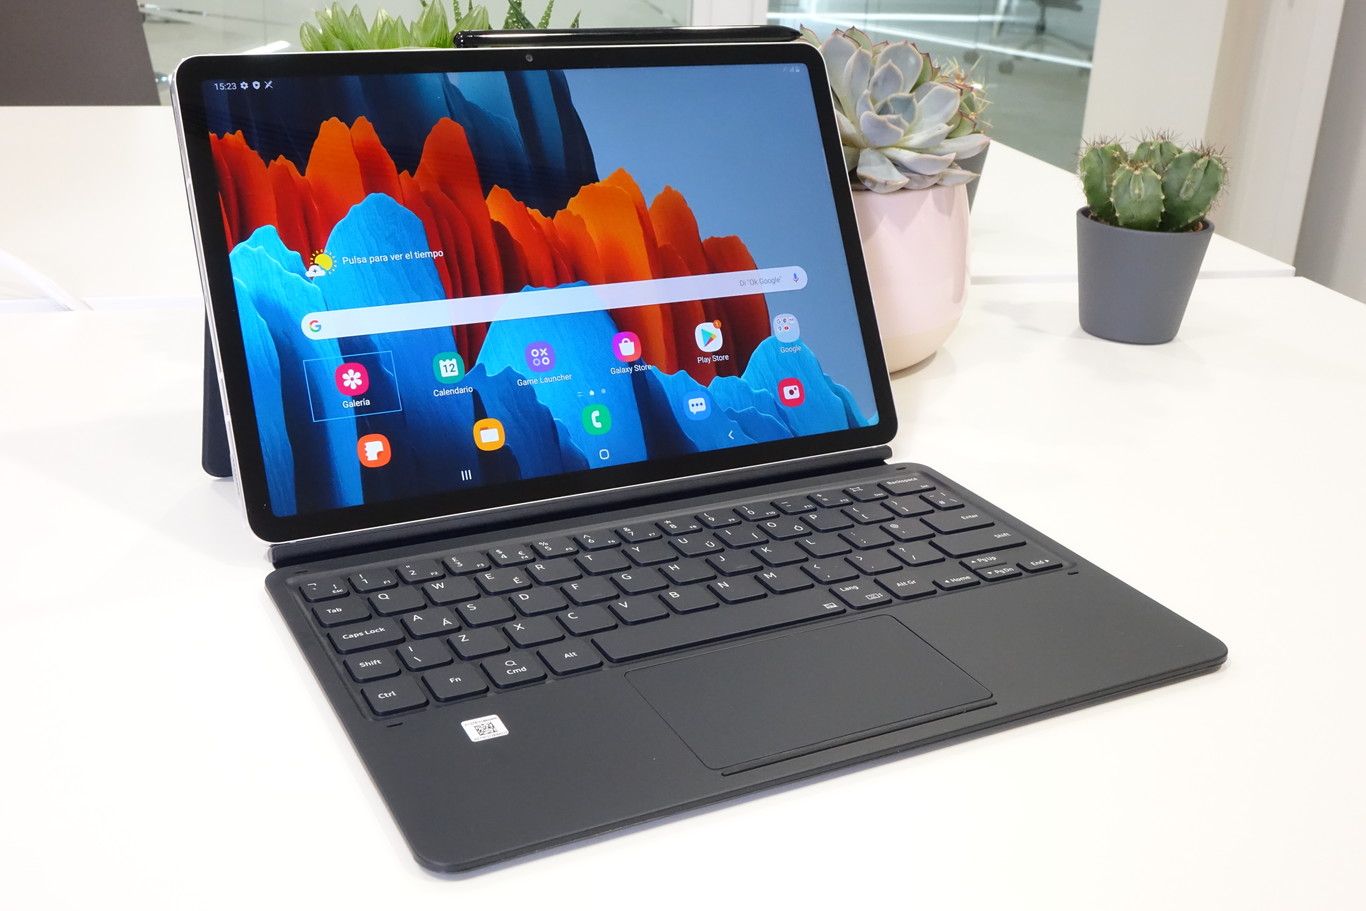 Samsung Galaxy Tab S7 and Tab S7 + hit the high end of tablets twice with 5G and 120 Hz panels 1